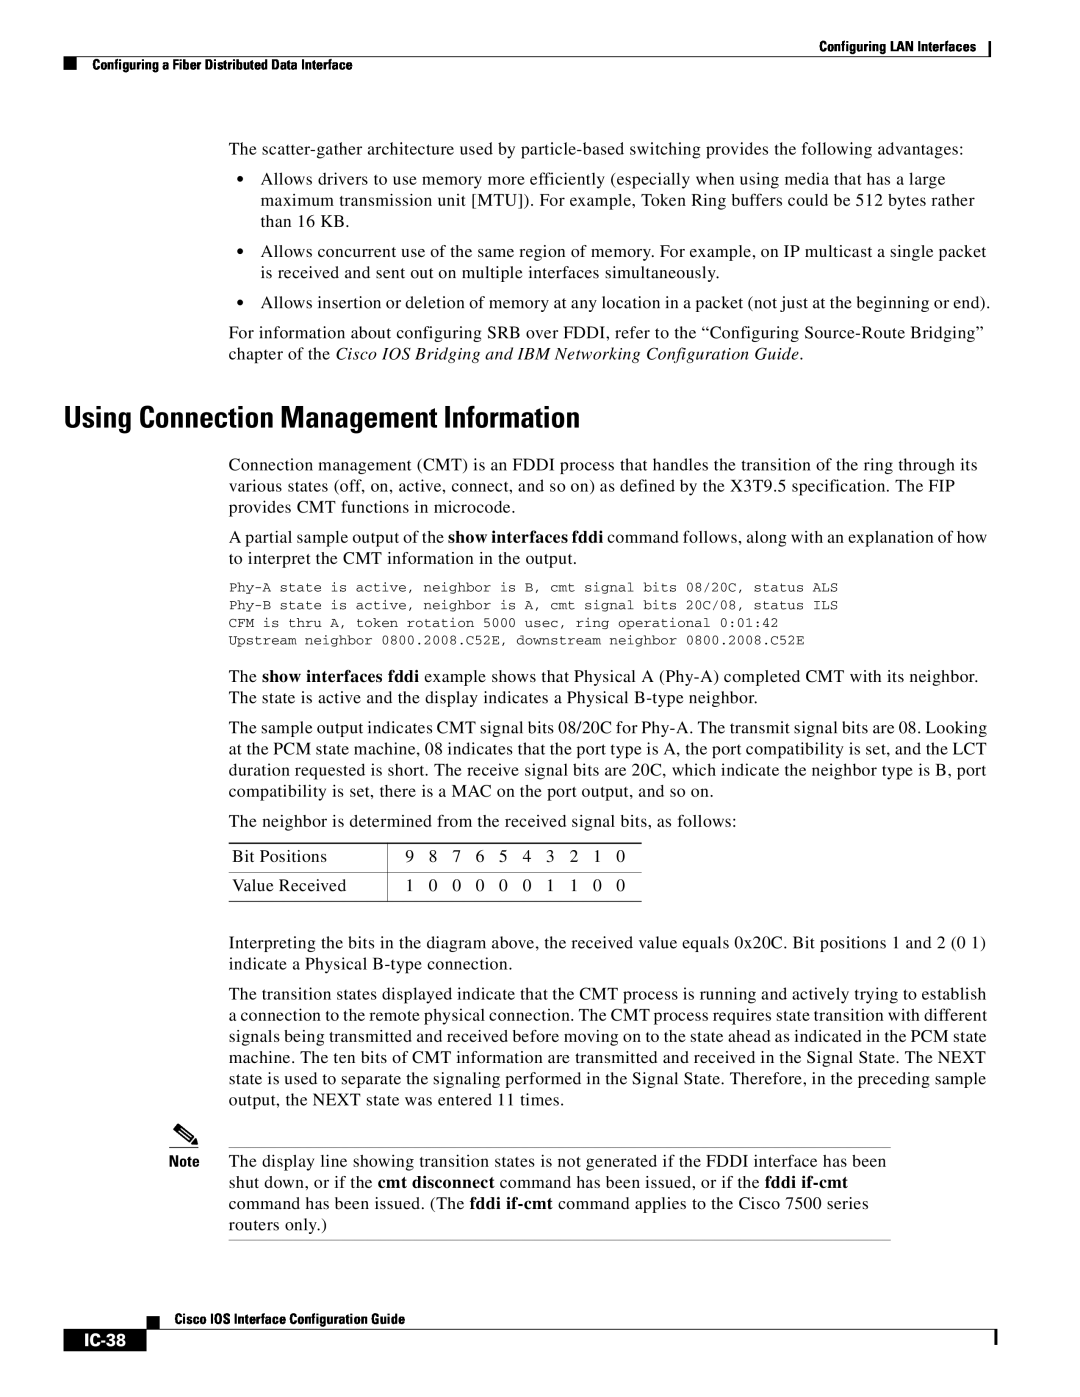 Cisco Systems IC-23 manual Using Connection Management Information, IC-38 